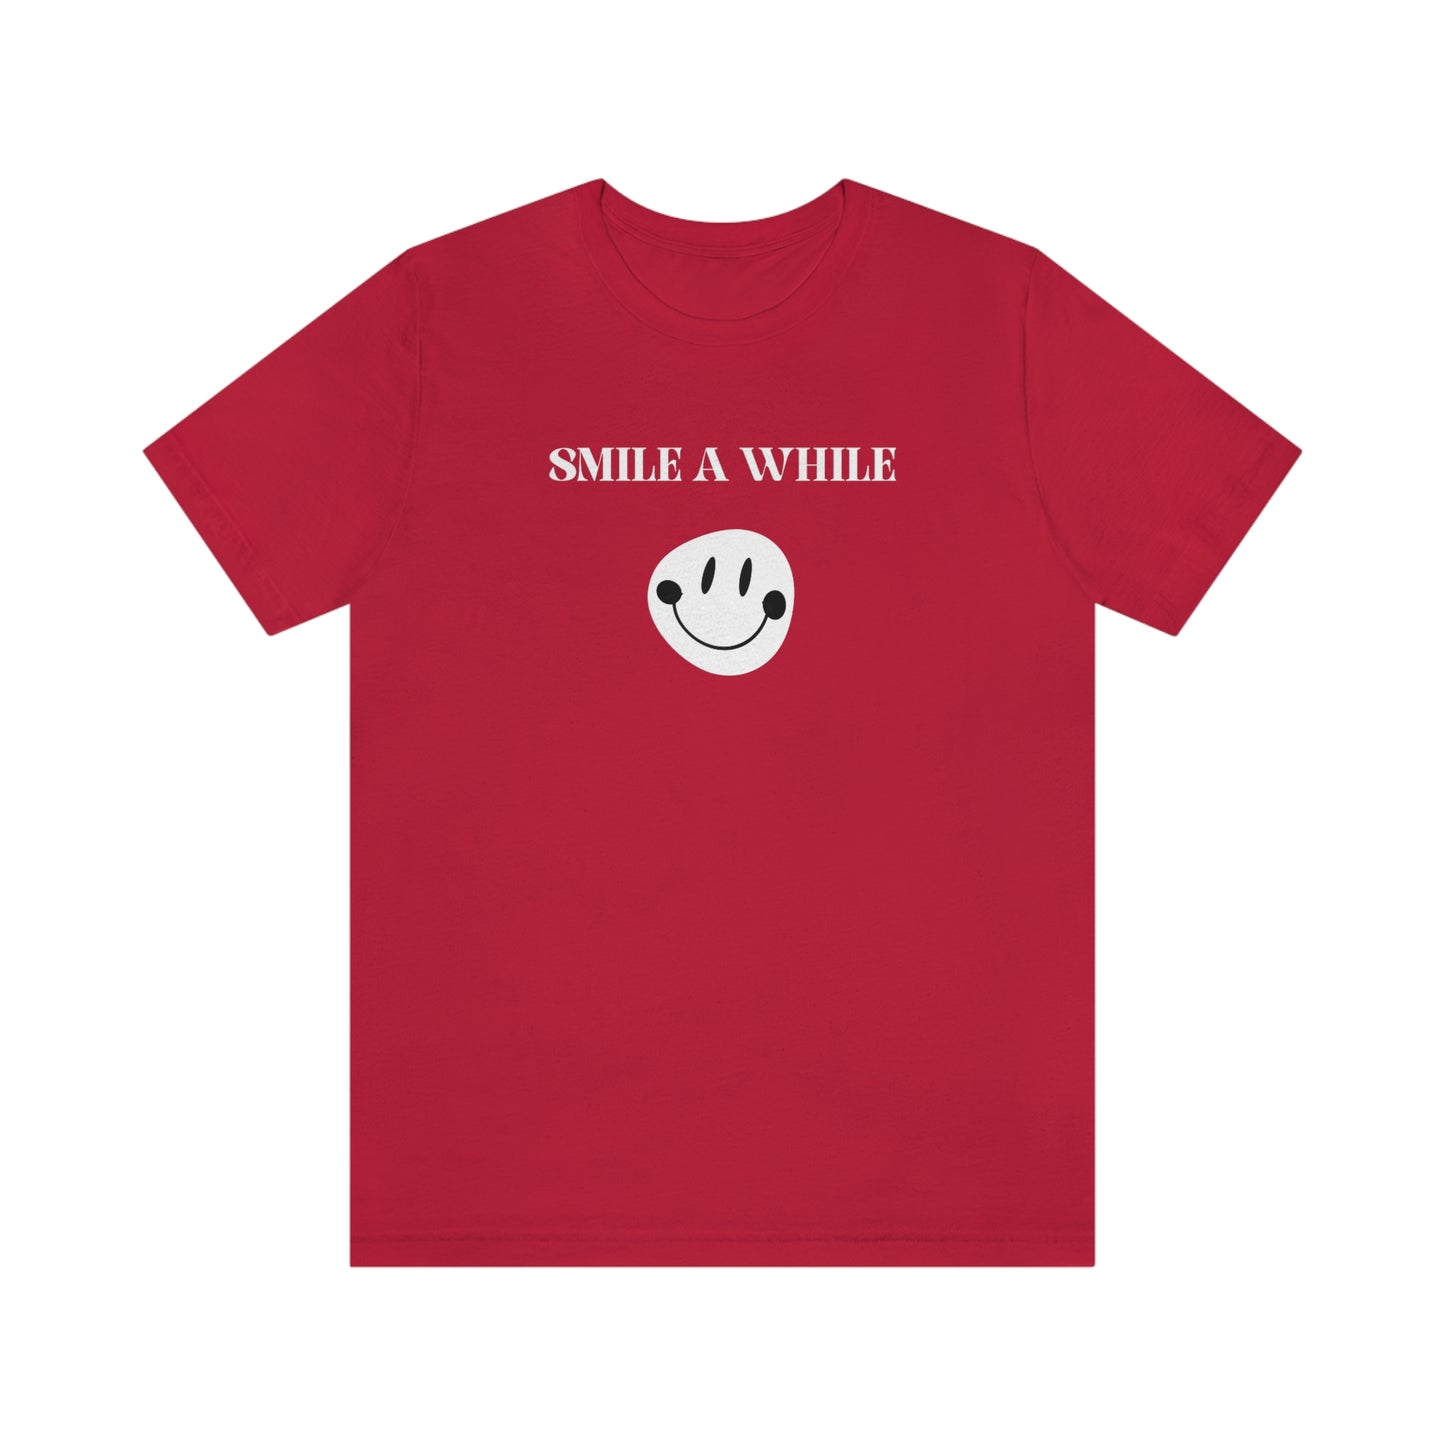 Smile a while inspirational words T shirts, tshirts with motivating words, t shirt gift for family and friends